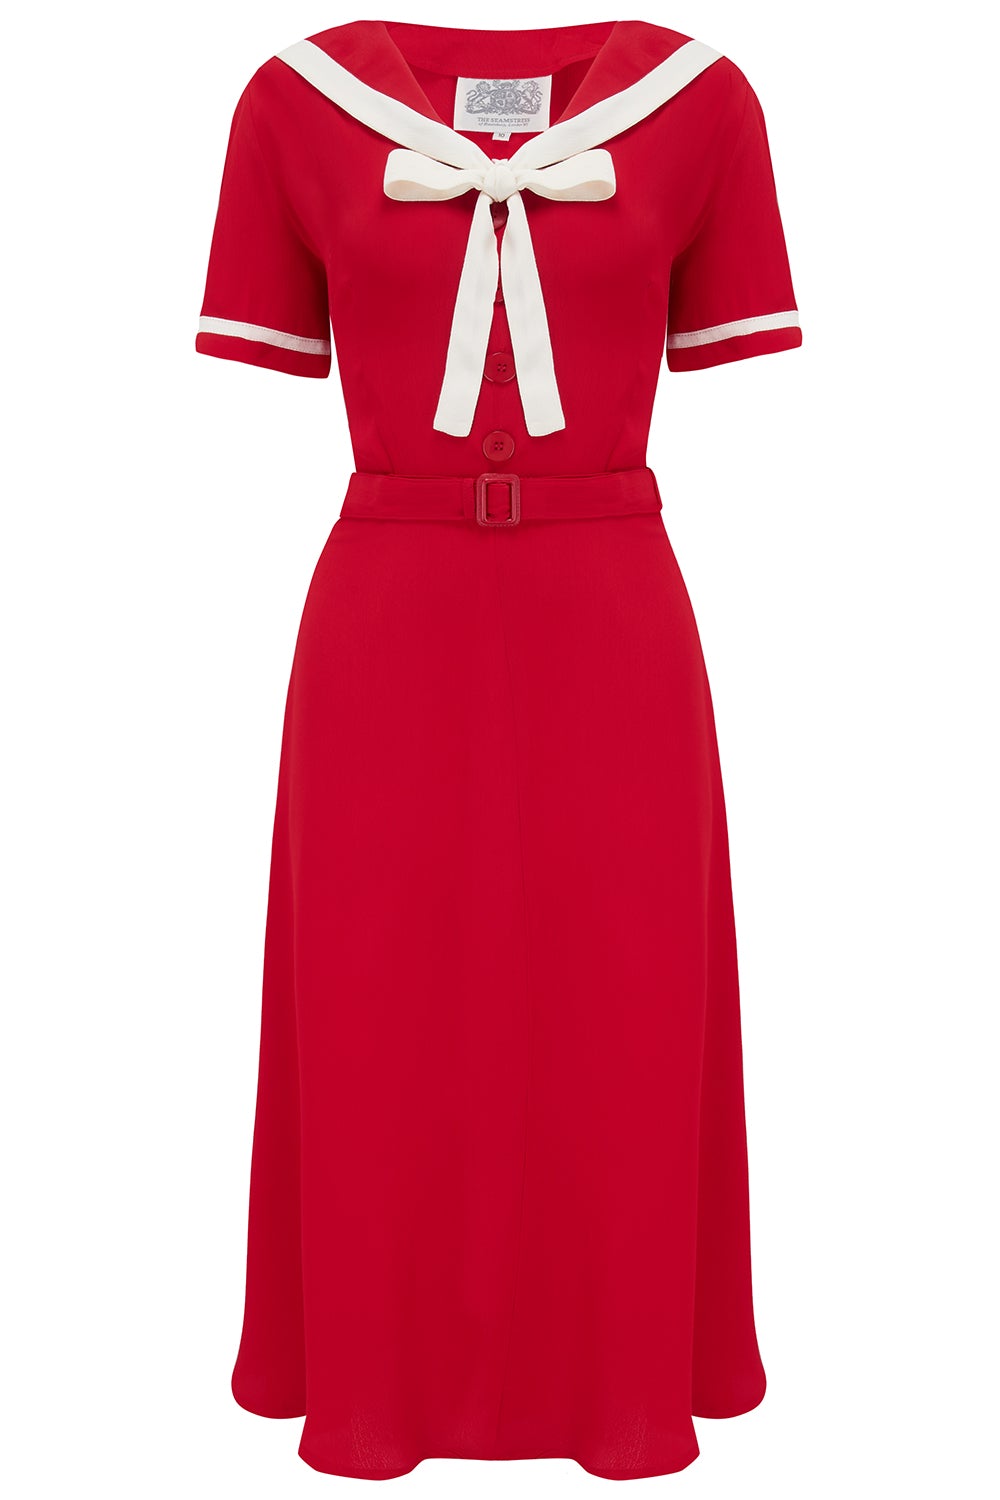 Vintage Cruise Outfits, Vacation Clothing Patti 1940s Nautical Sailor Dress in Red Authentic true vintage style £79.01 AT vintagedancer.com